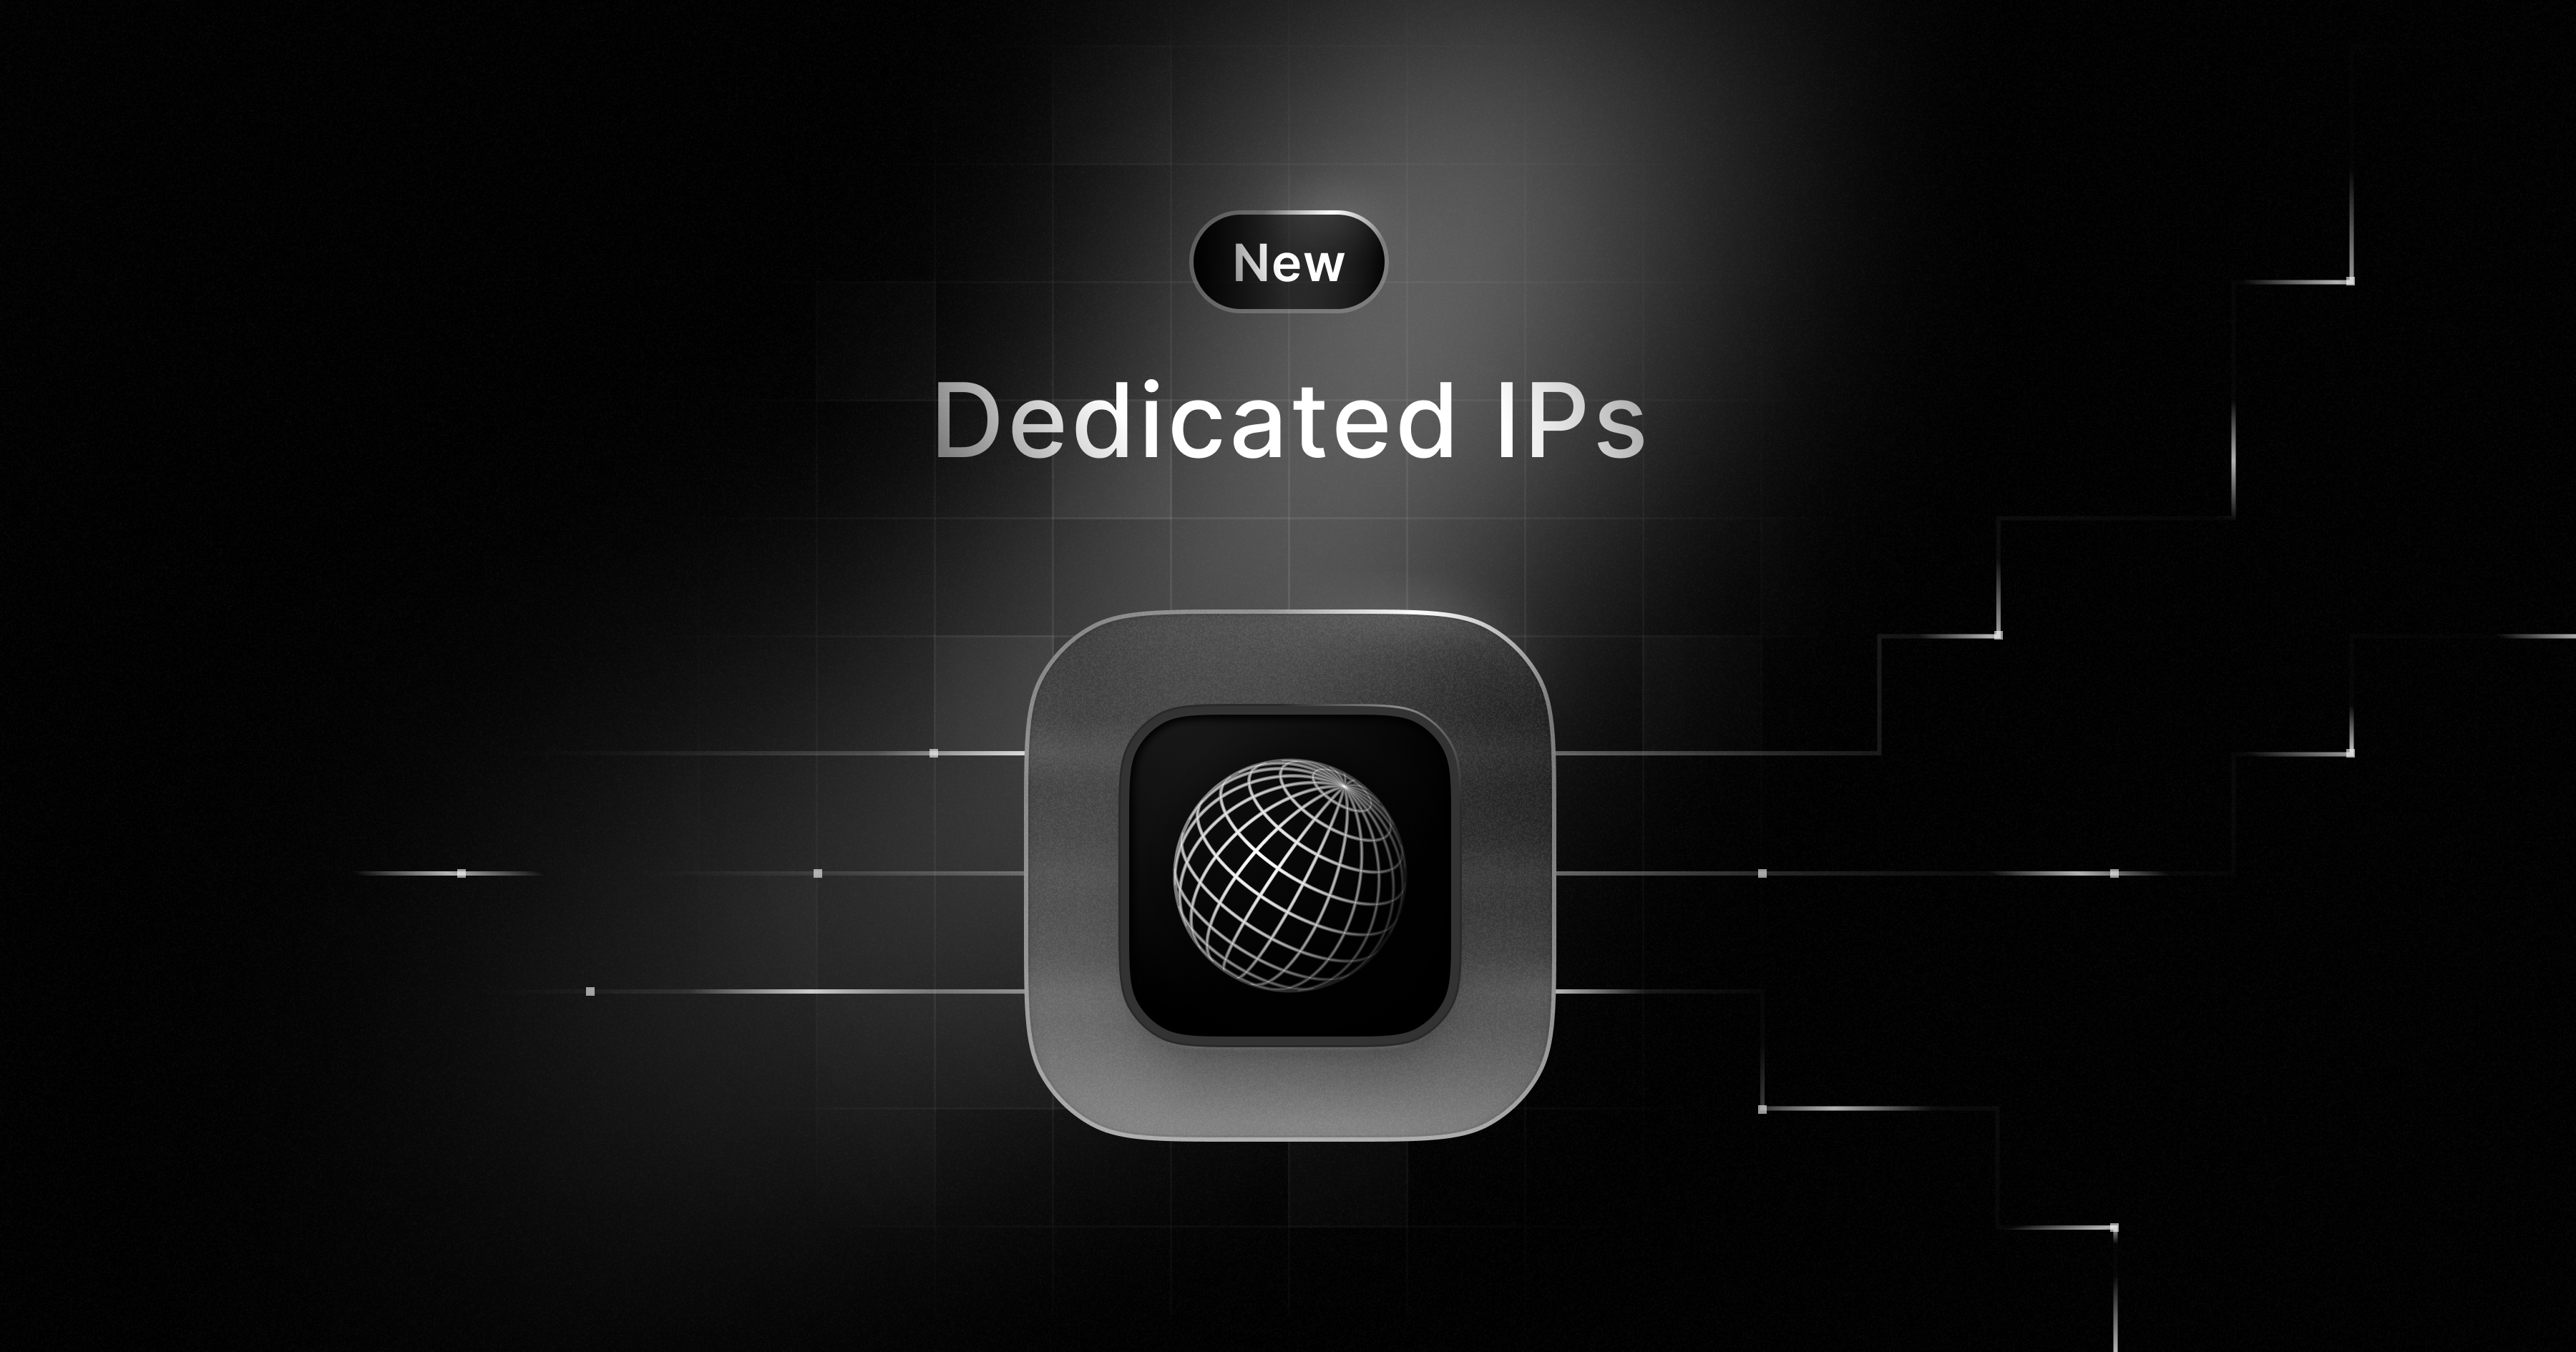 Introducing Managed Dedicated IPs